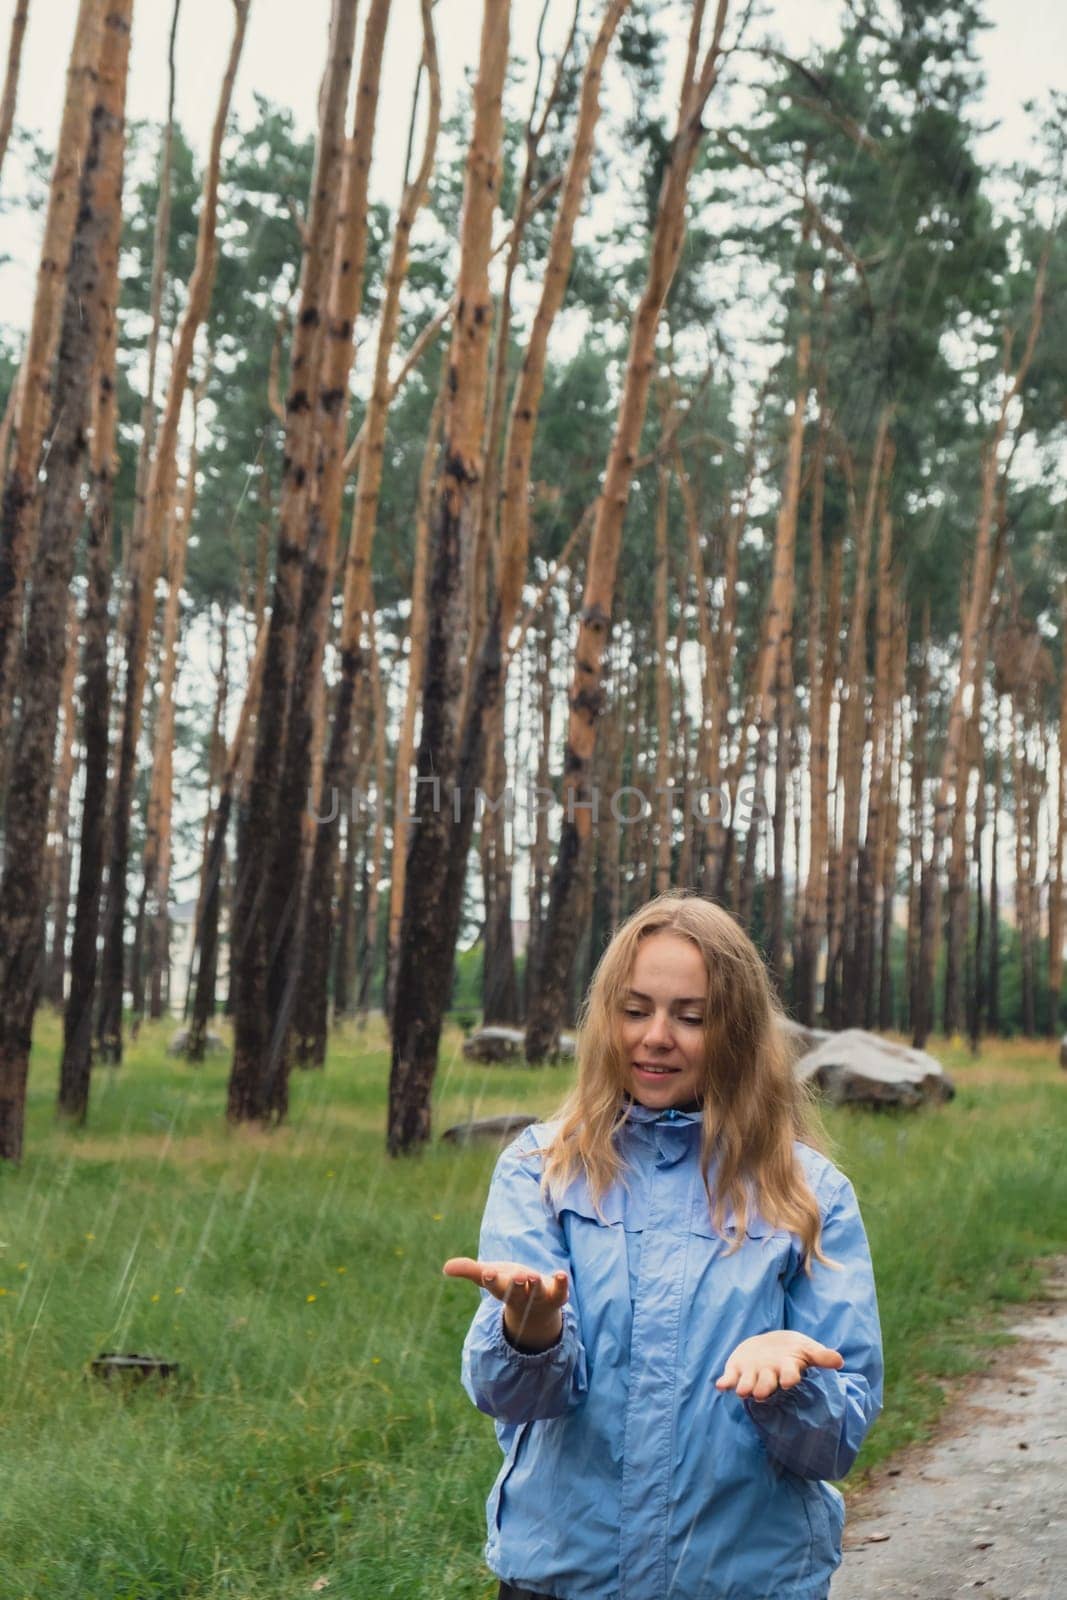 Happy young woman in blue raincoat enjoying the woods in park. True emotions open arms outdoors in rainy weather forecast. Tourist rest and feel freedom. Autumn season